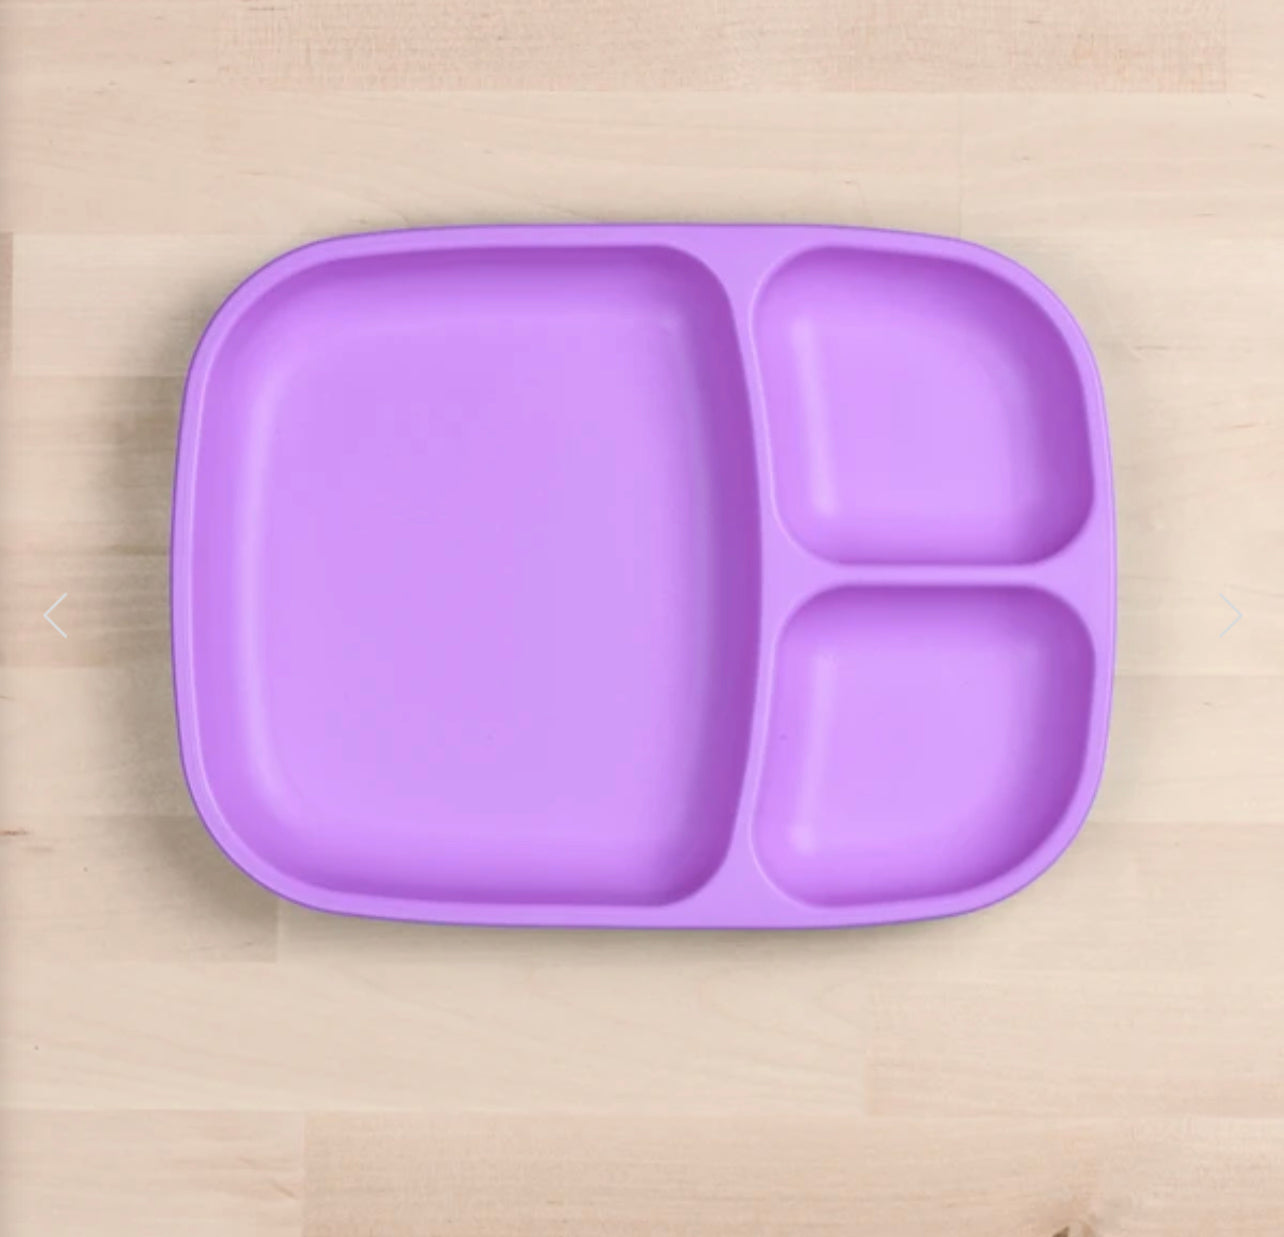 Re-Play Divided Tray - Purple